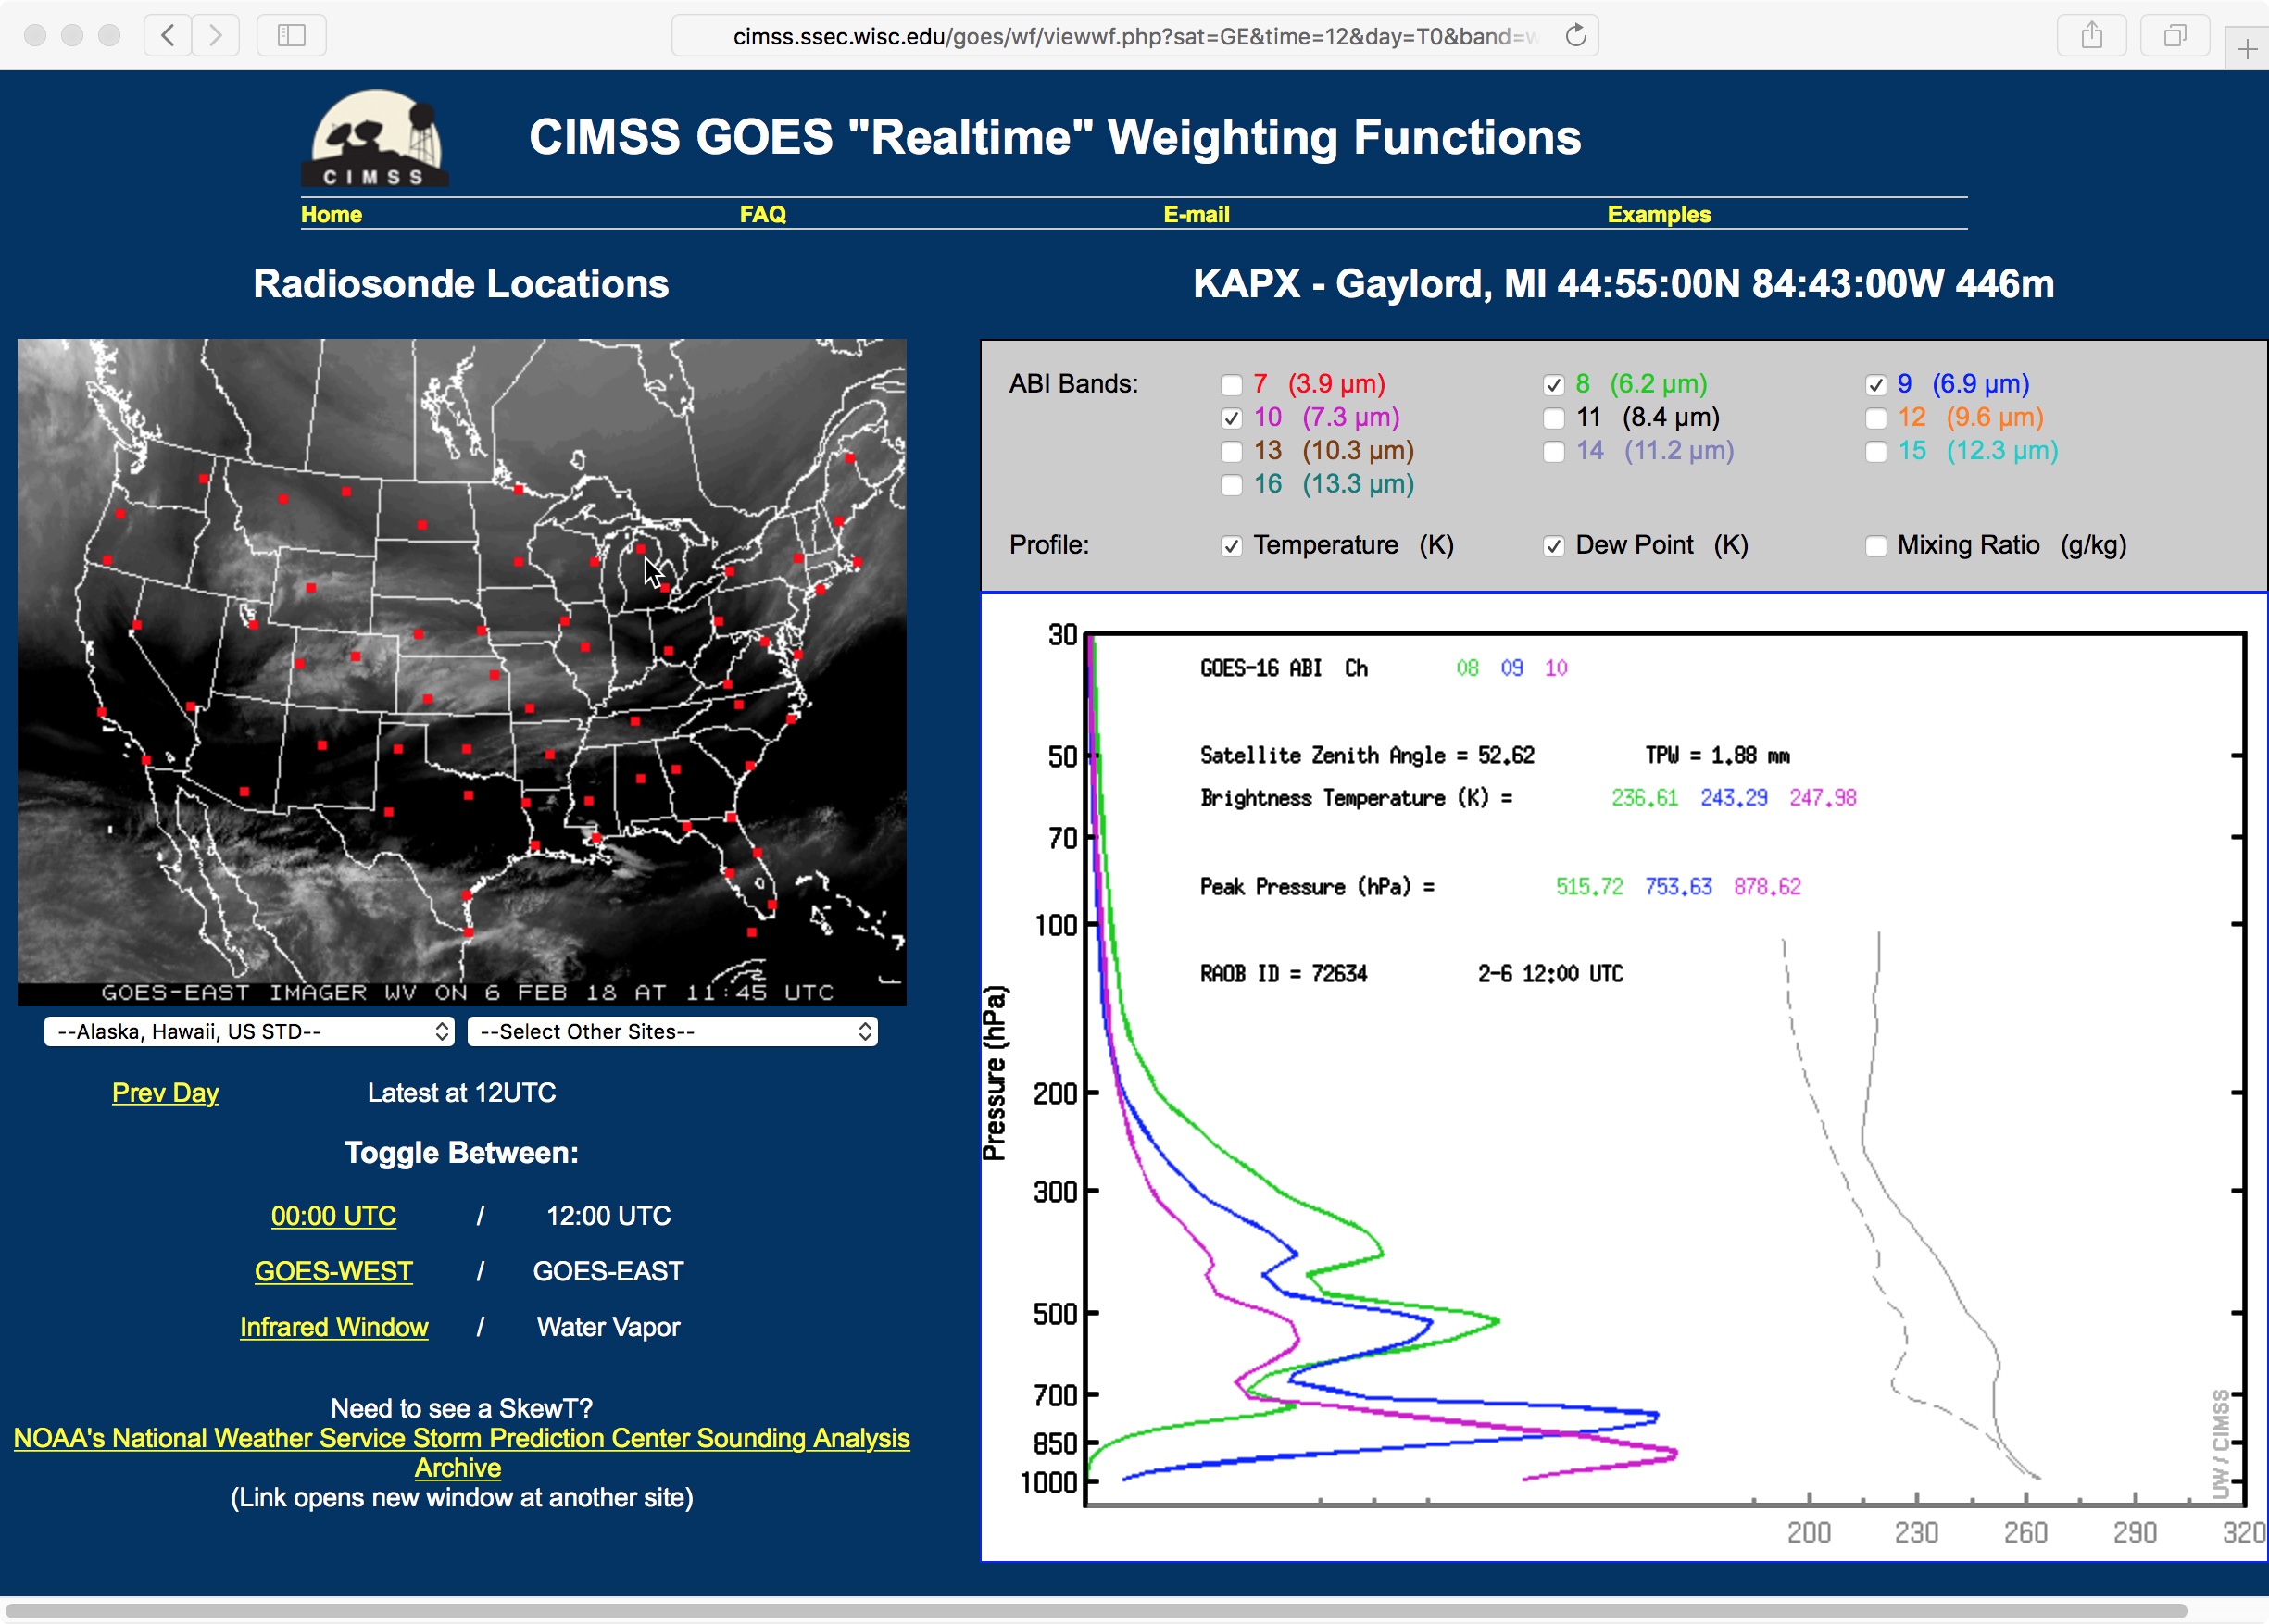 Weighting function plots for the three GOES-16 Water Vapor bands, calculated using rawinsonde data from Gaylord, Michigan [click to enlarge]